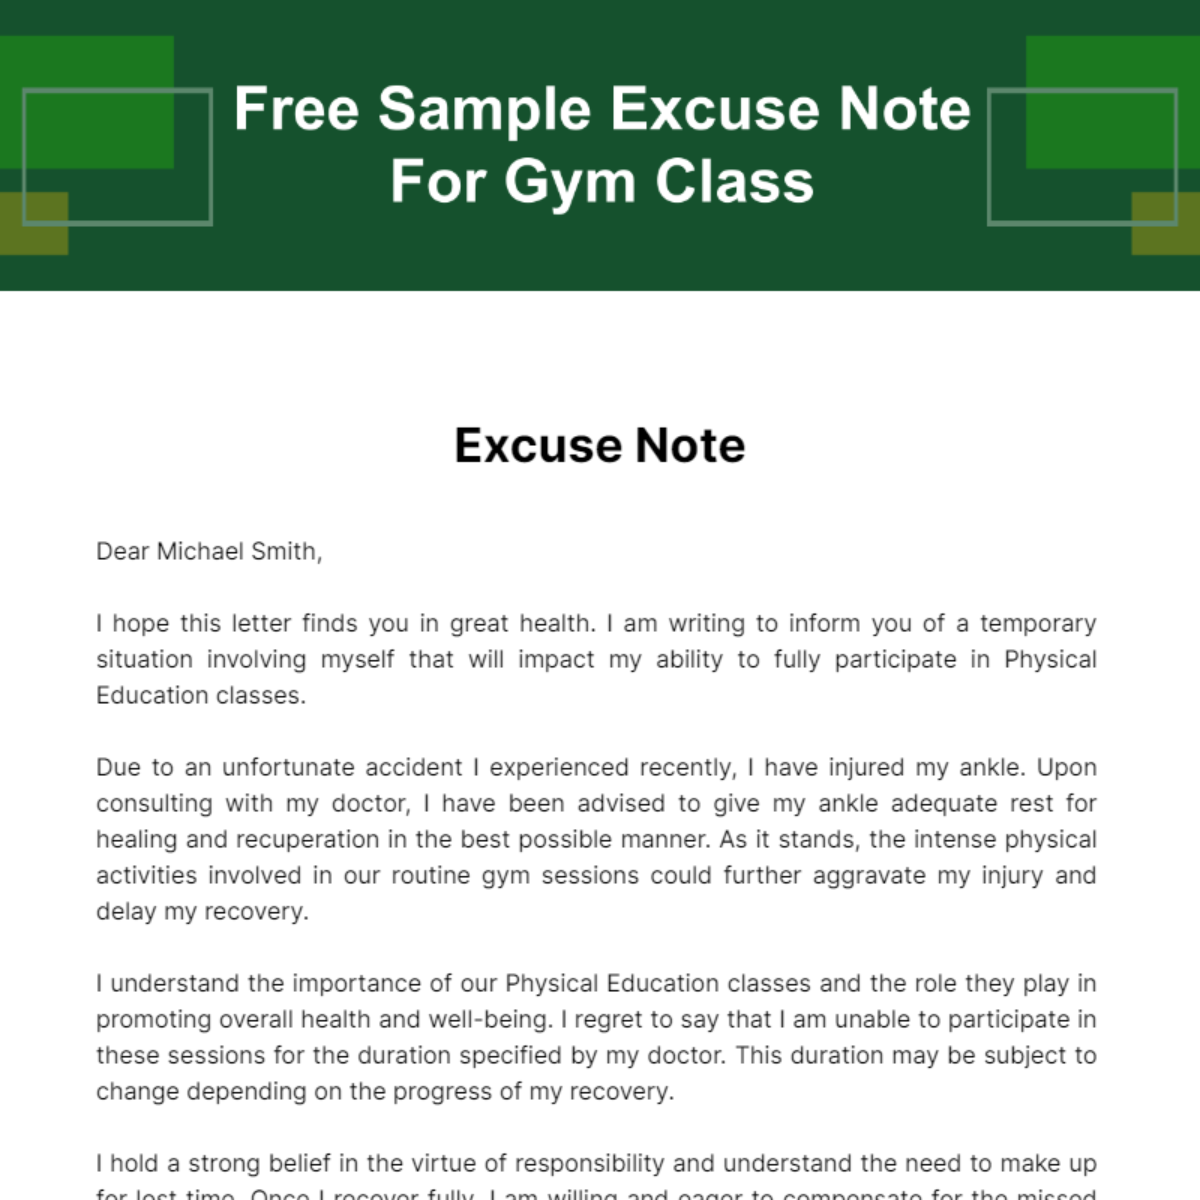 Free Sample Excuse Note For Gym Class Template